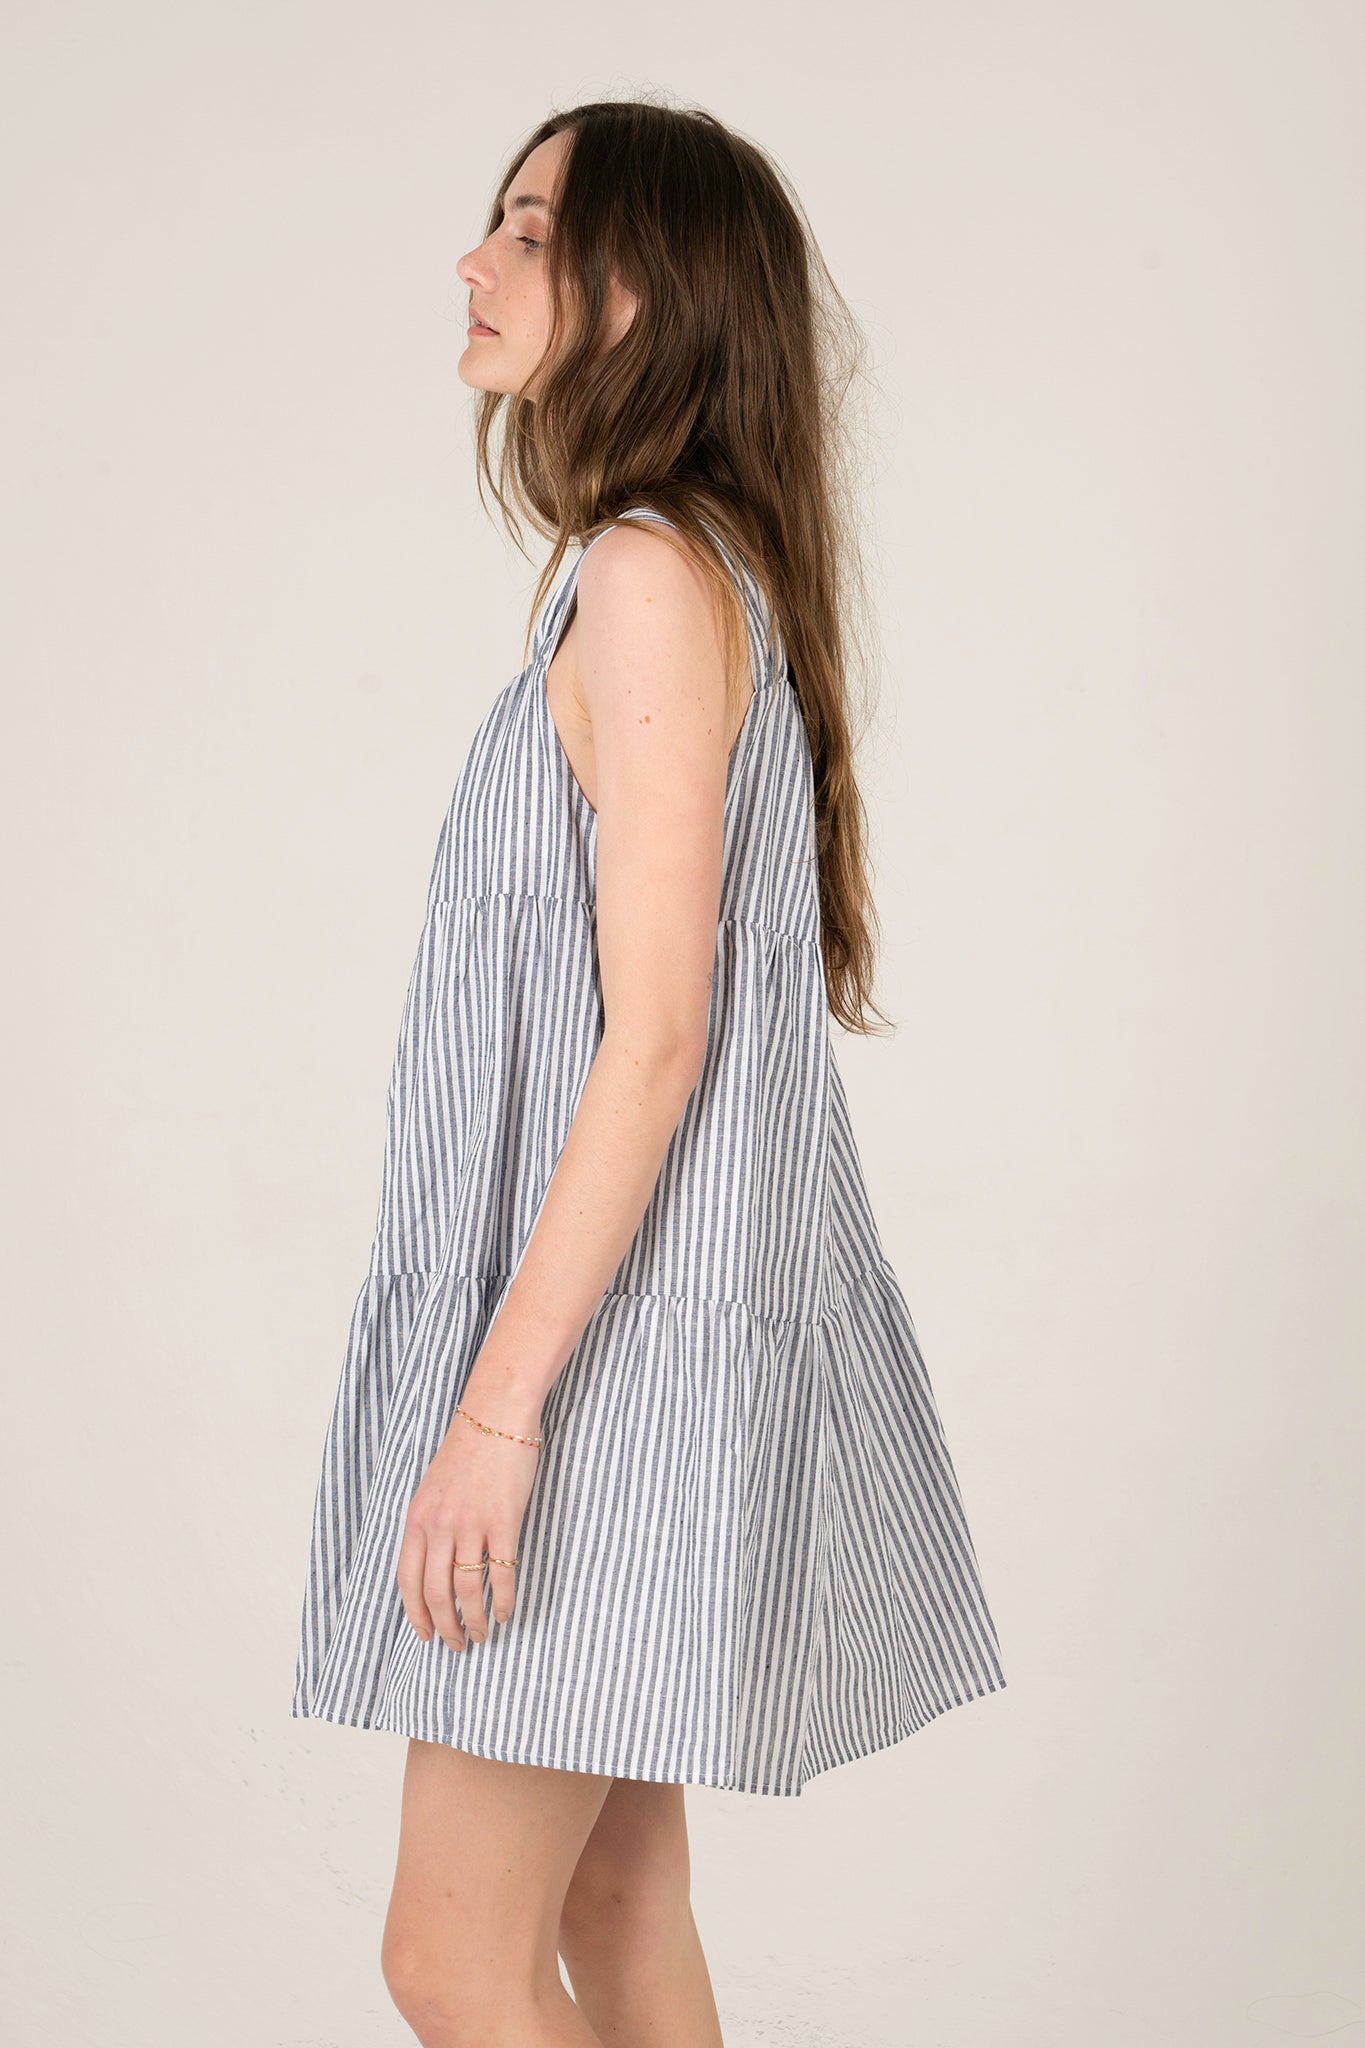 View 2 of Daphne Baby Doll Striped Dress, a Dresses from Larrea Cove. Detail: .